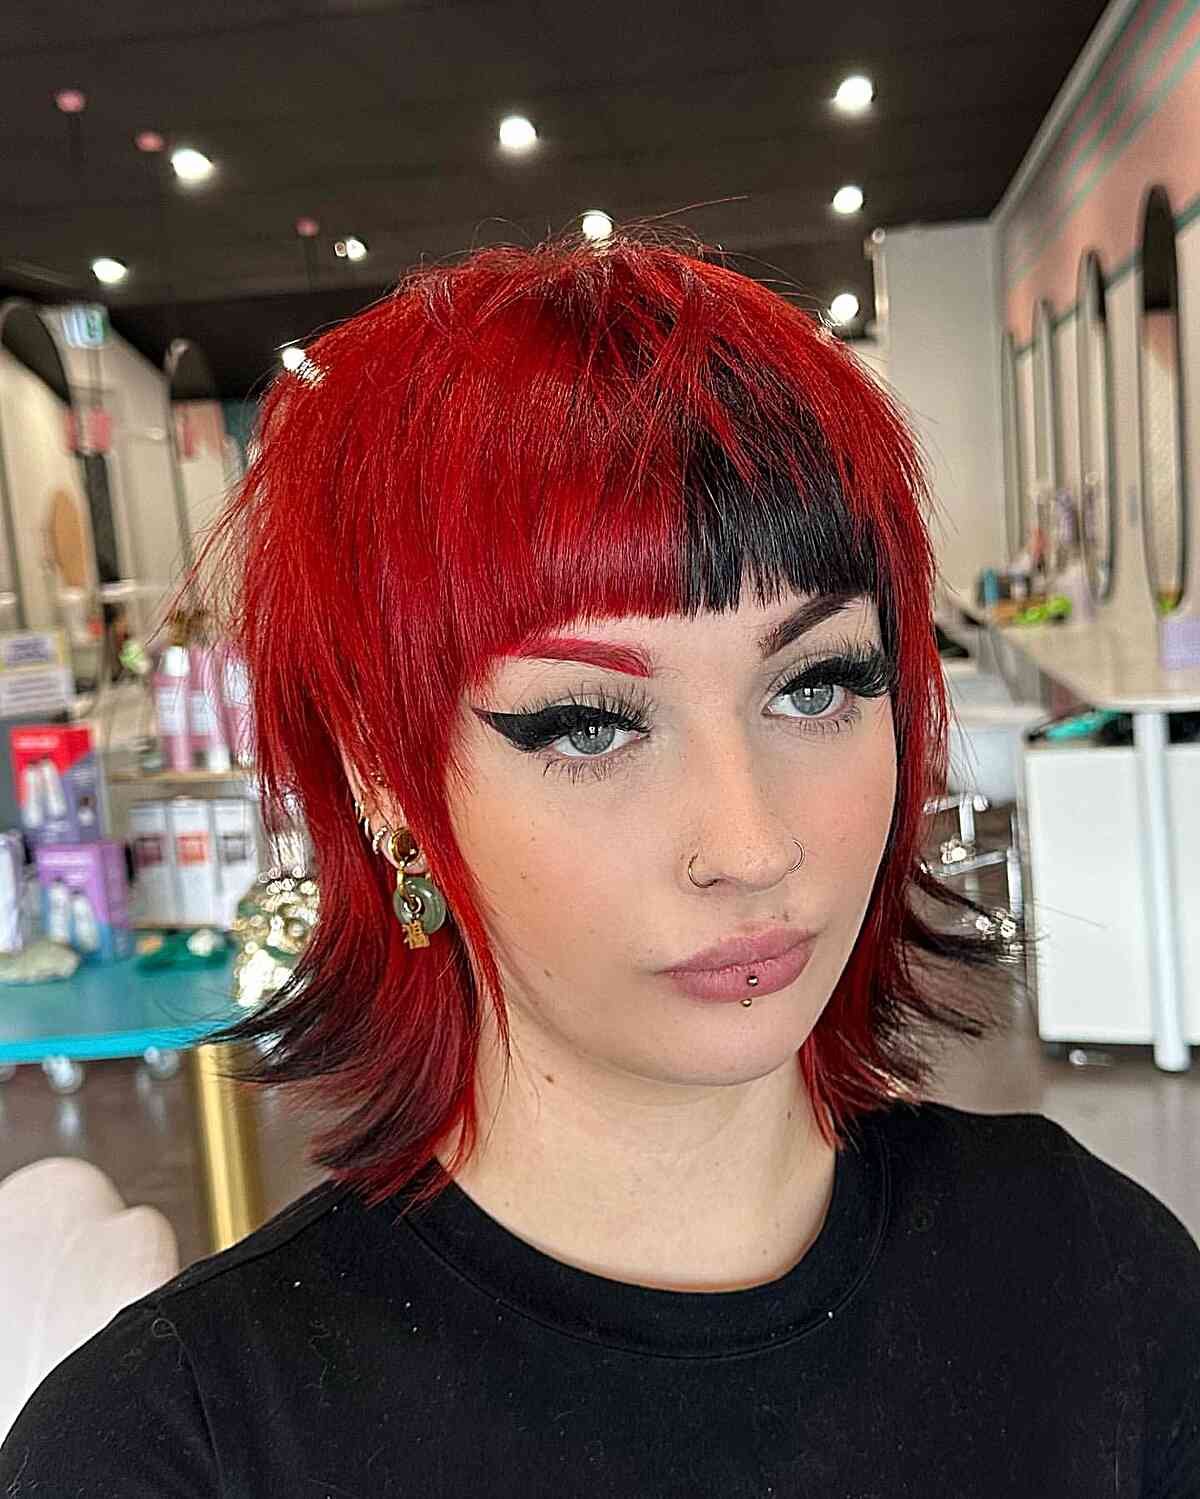 Punk Hair Textured Blood Red Pixie Mullet for women with an edgy side